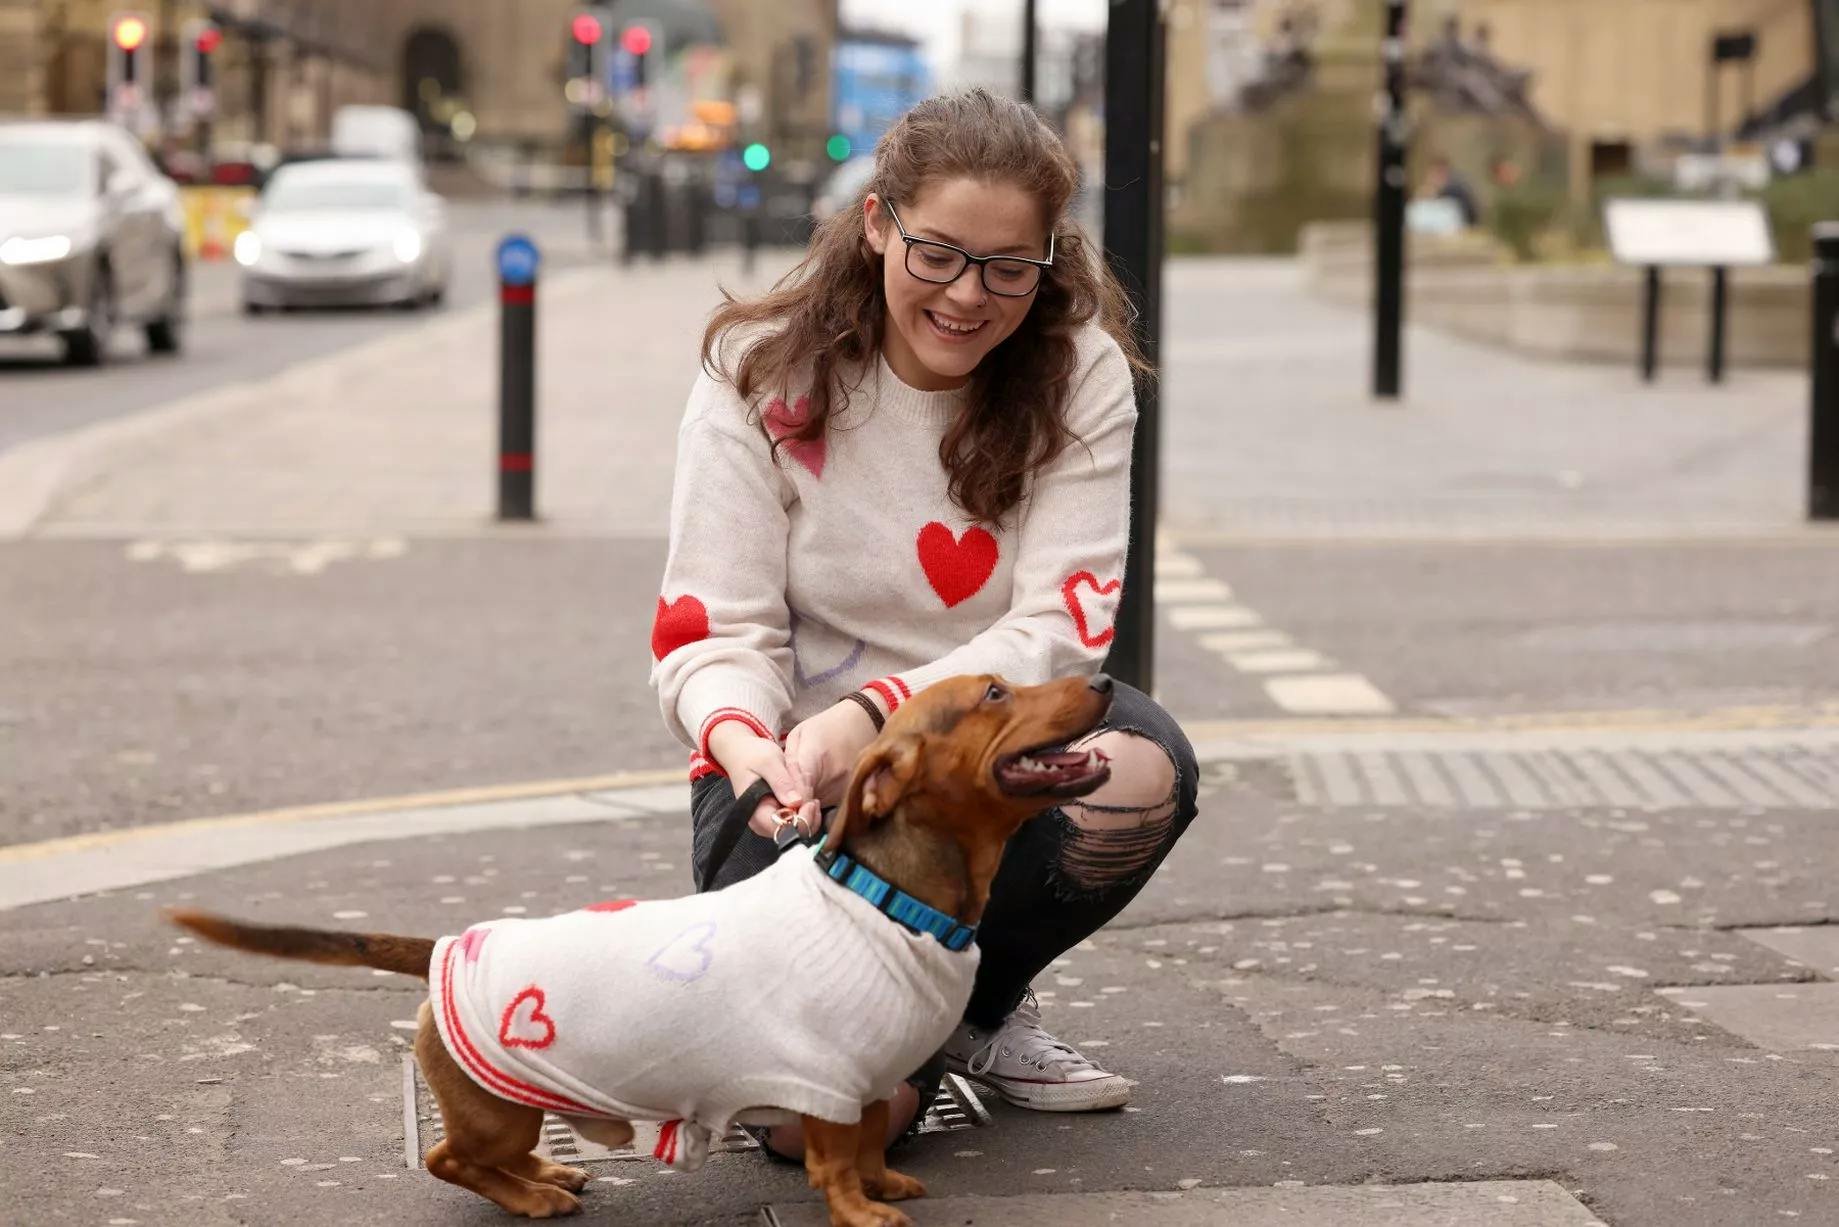 Love in the air at Valentine’s event in Newcastle as dogs descend on Pup Up Cafe